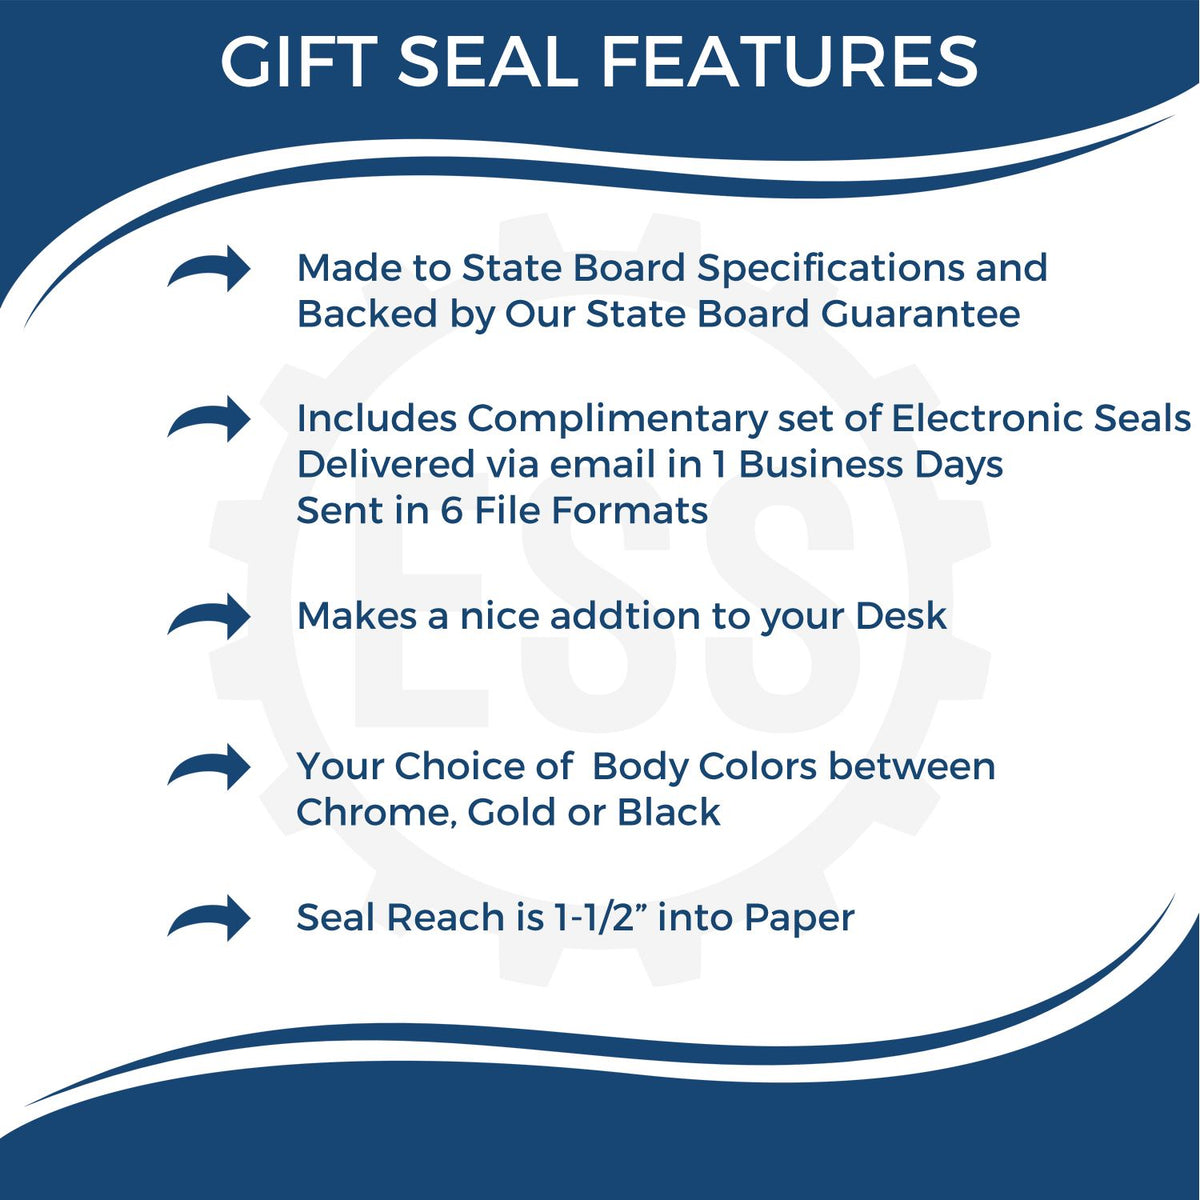 A picture of an infographic highlighting the selling points for the Gift Arkansas Engineer Seal